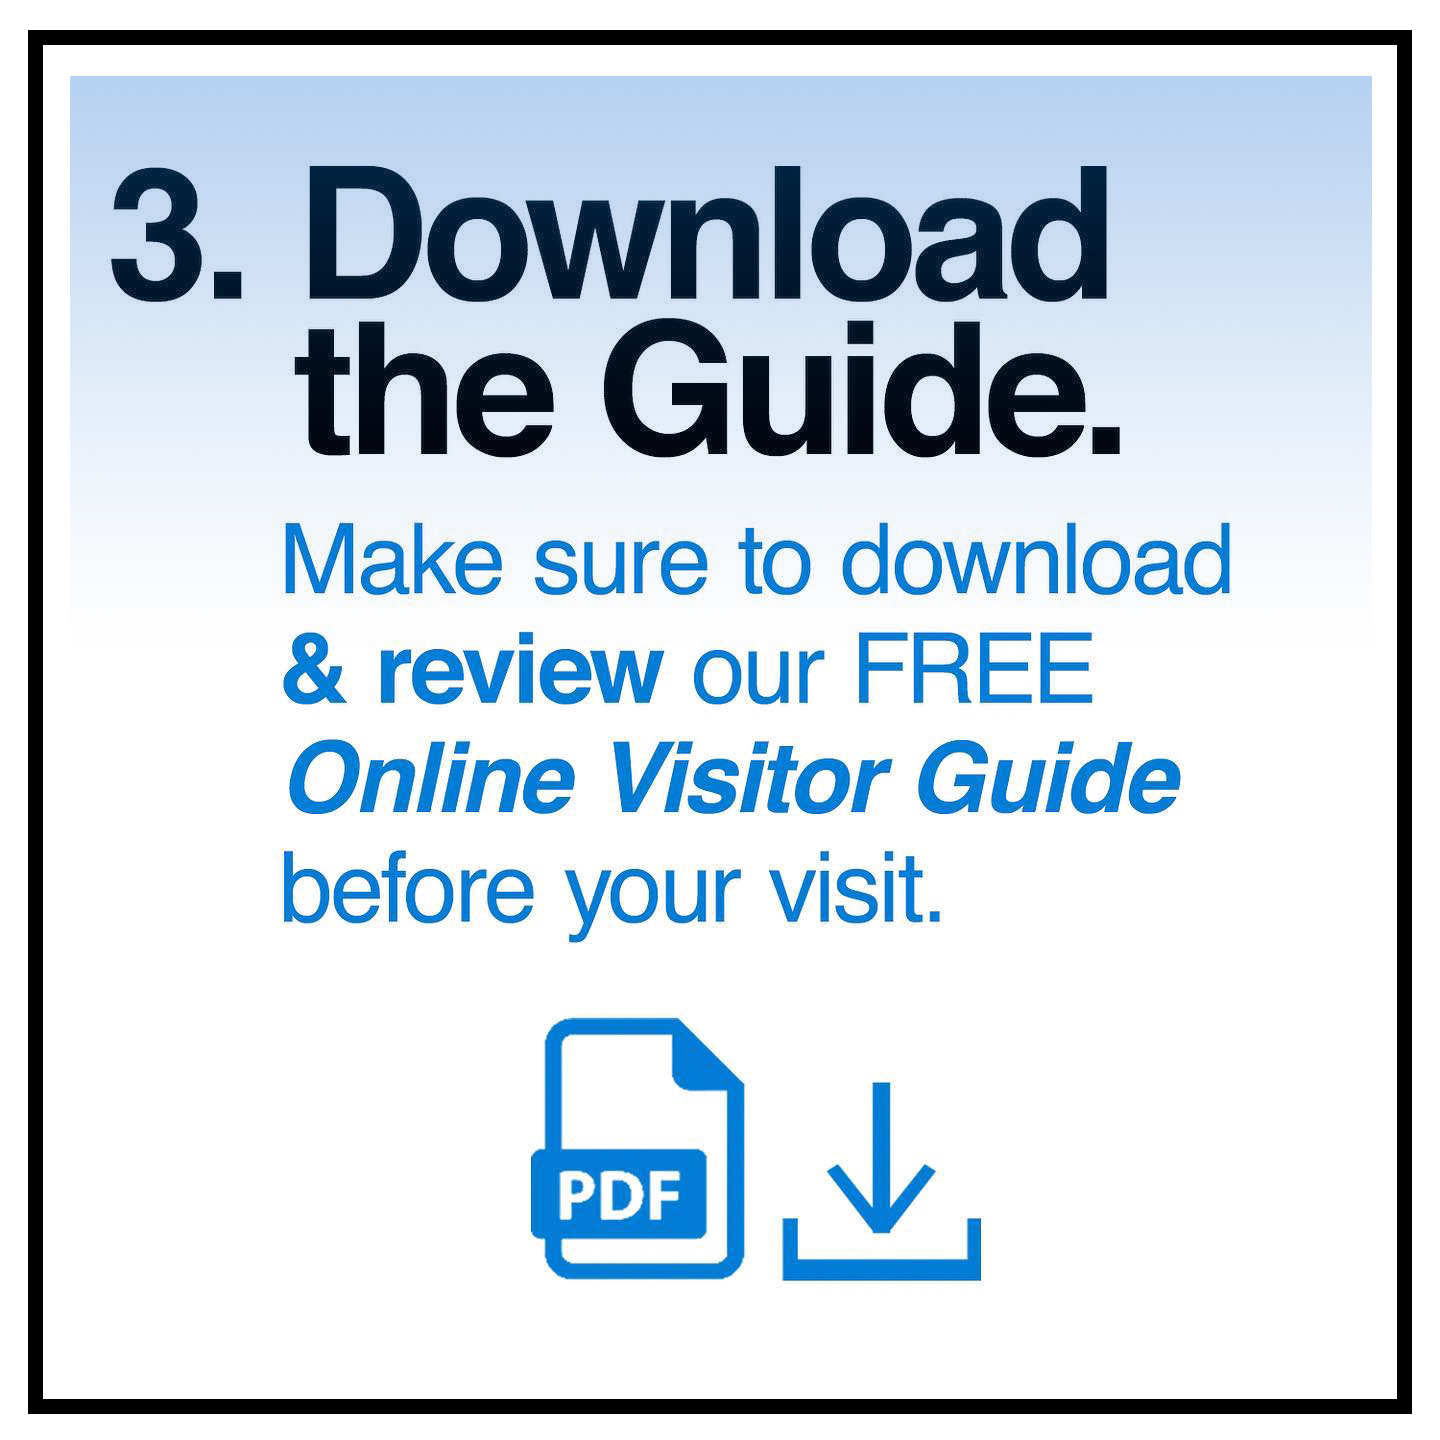 3. Download the Guide. Make sure to download & review our FREE Online Visitor Guide PDF before you visit. Click here to get it!